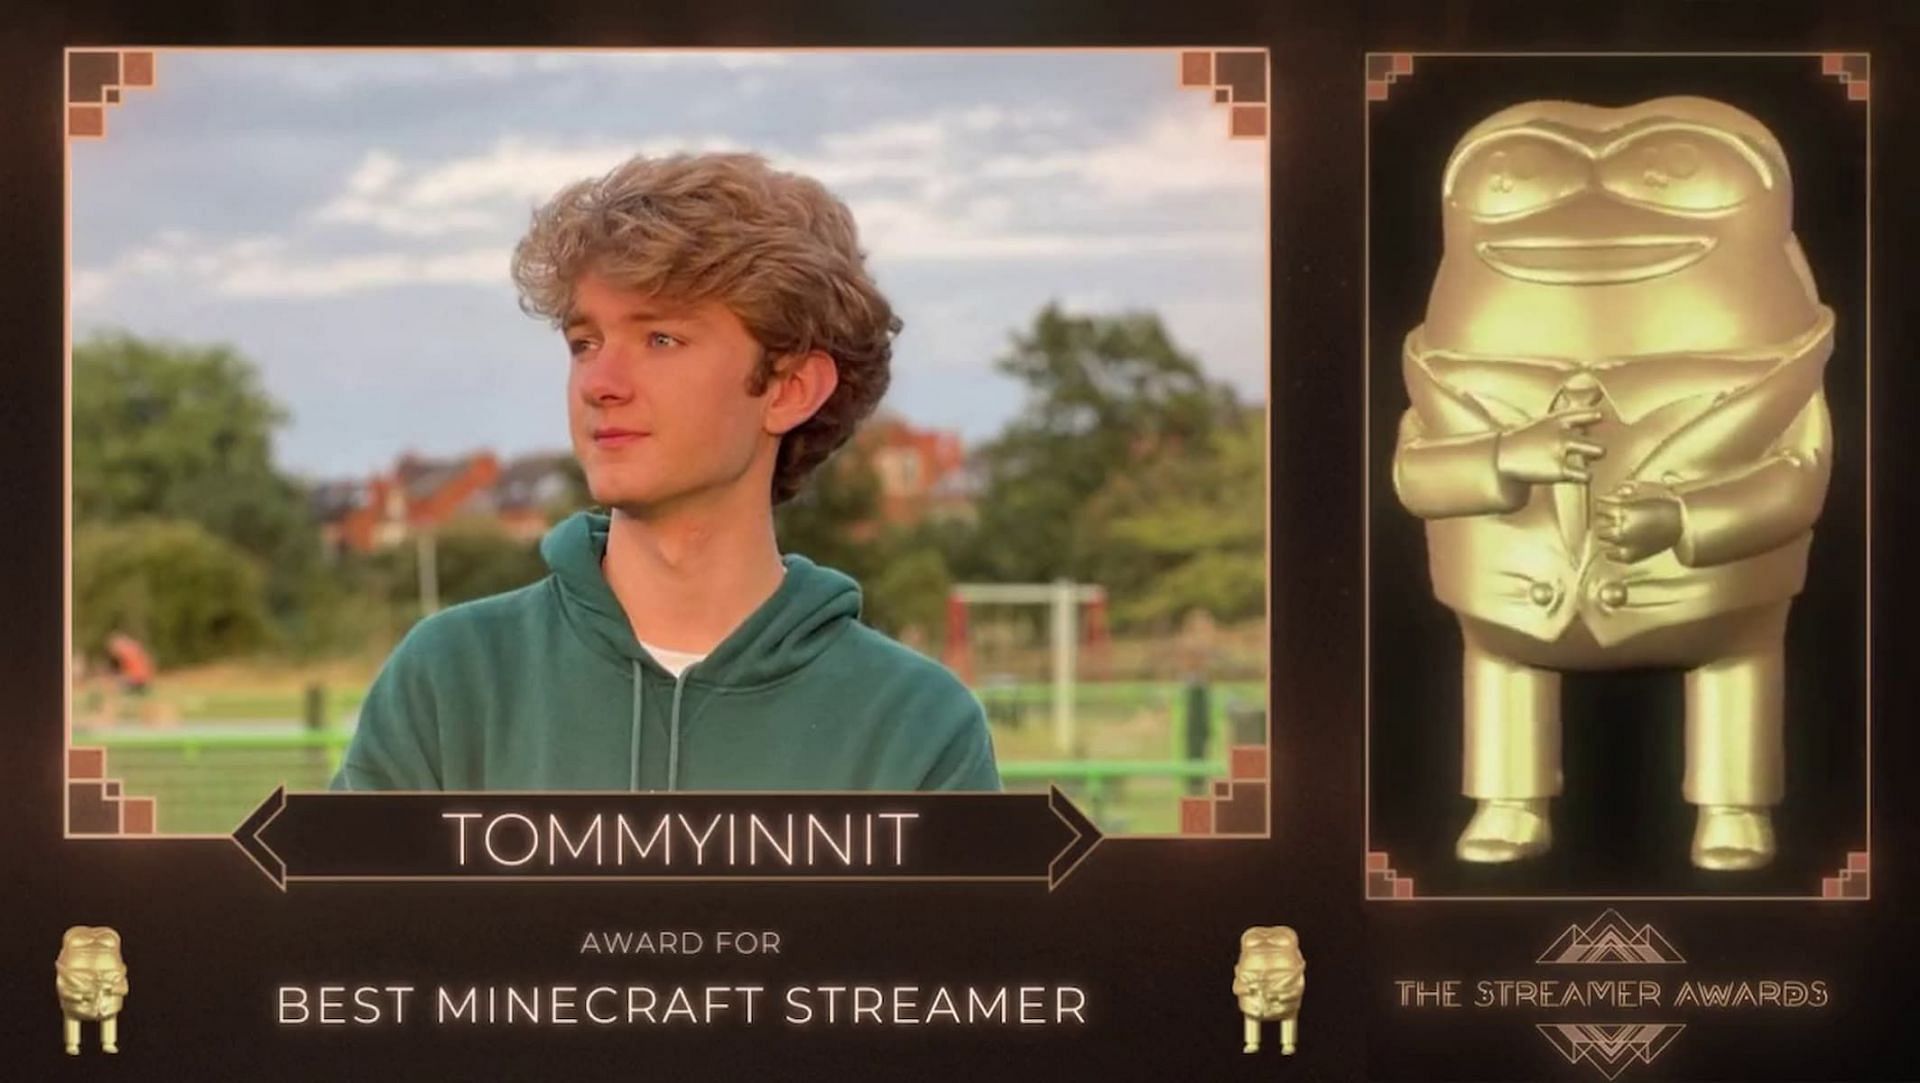 Top 5 facts you didn't know about Minecraft Streamer Tubbo